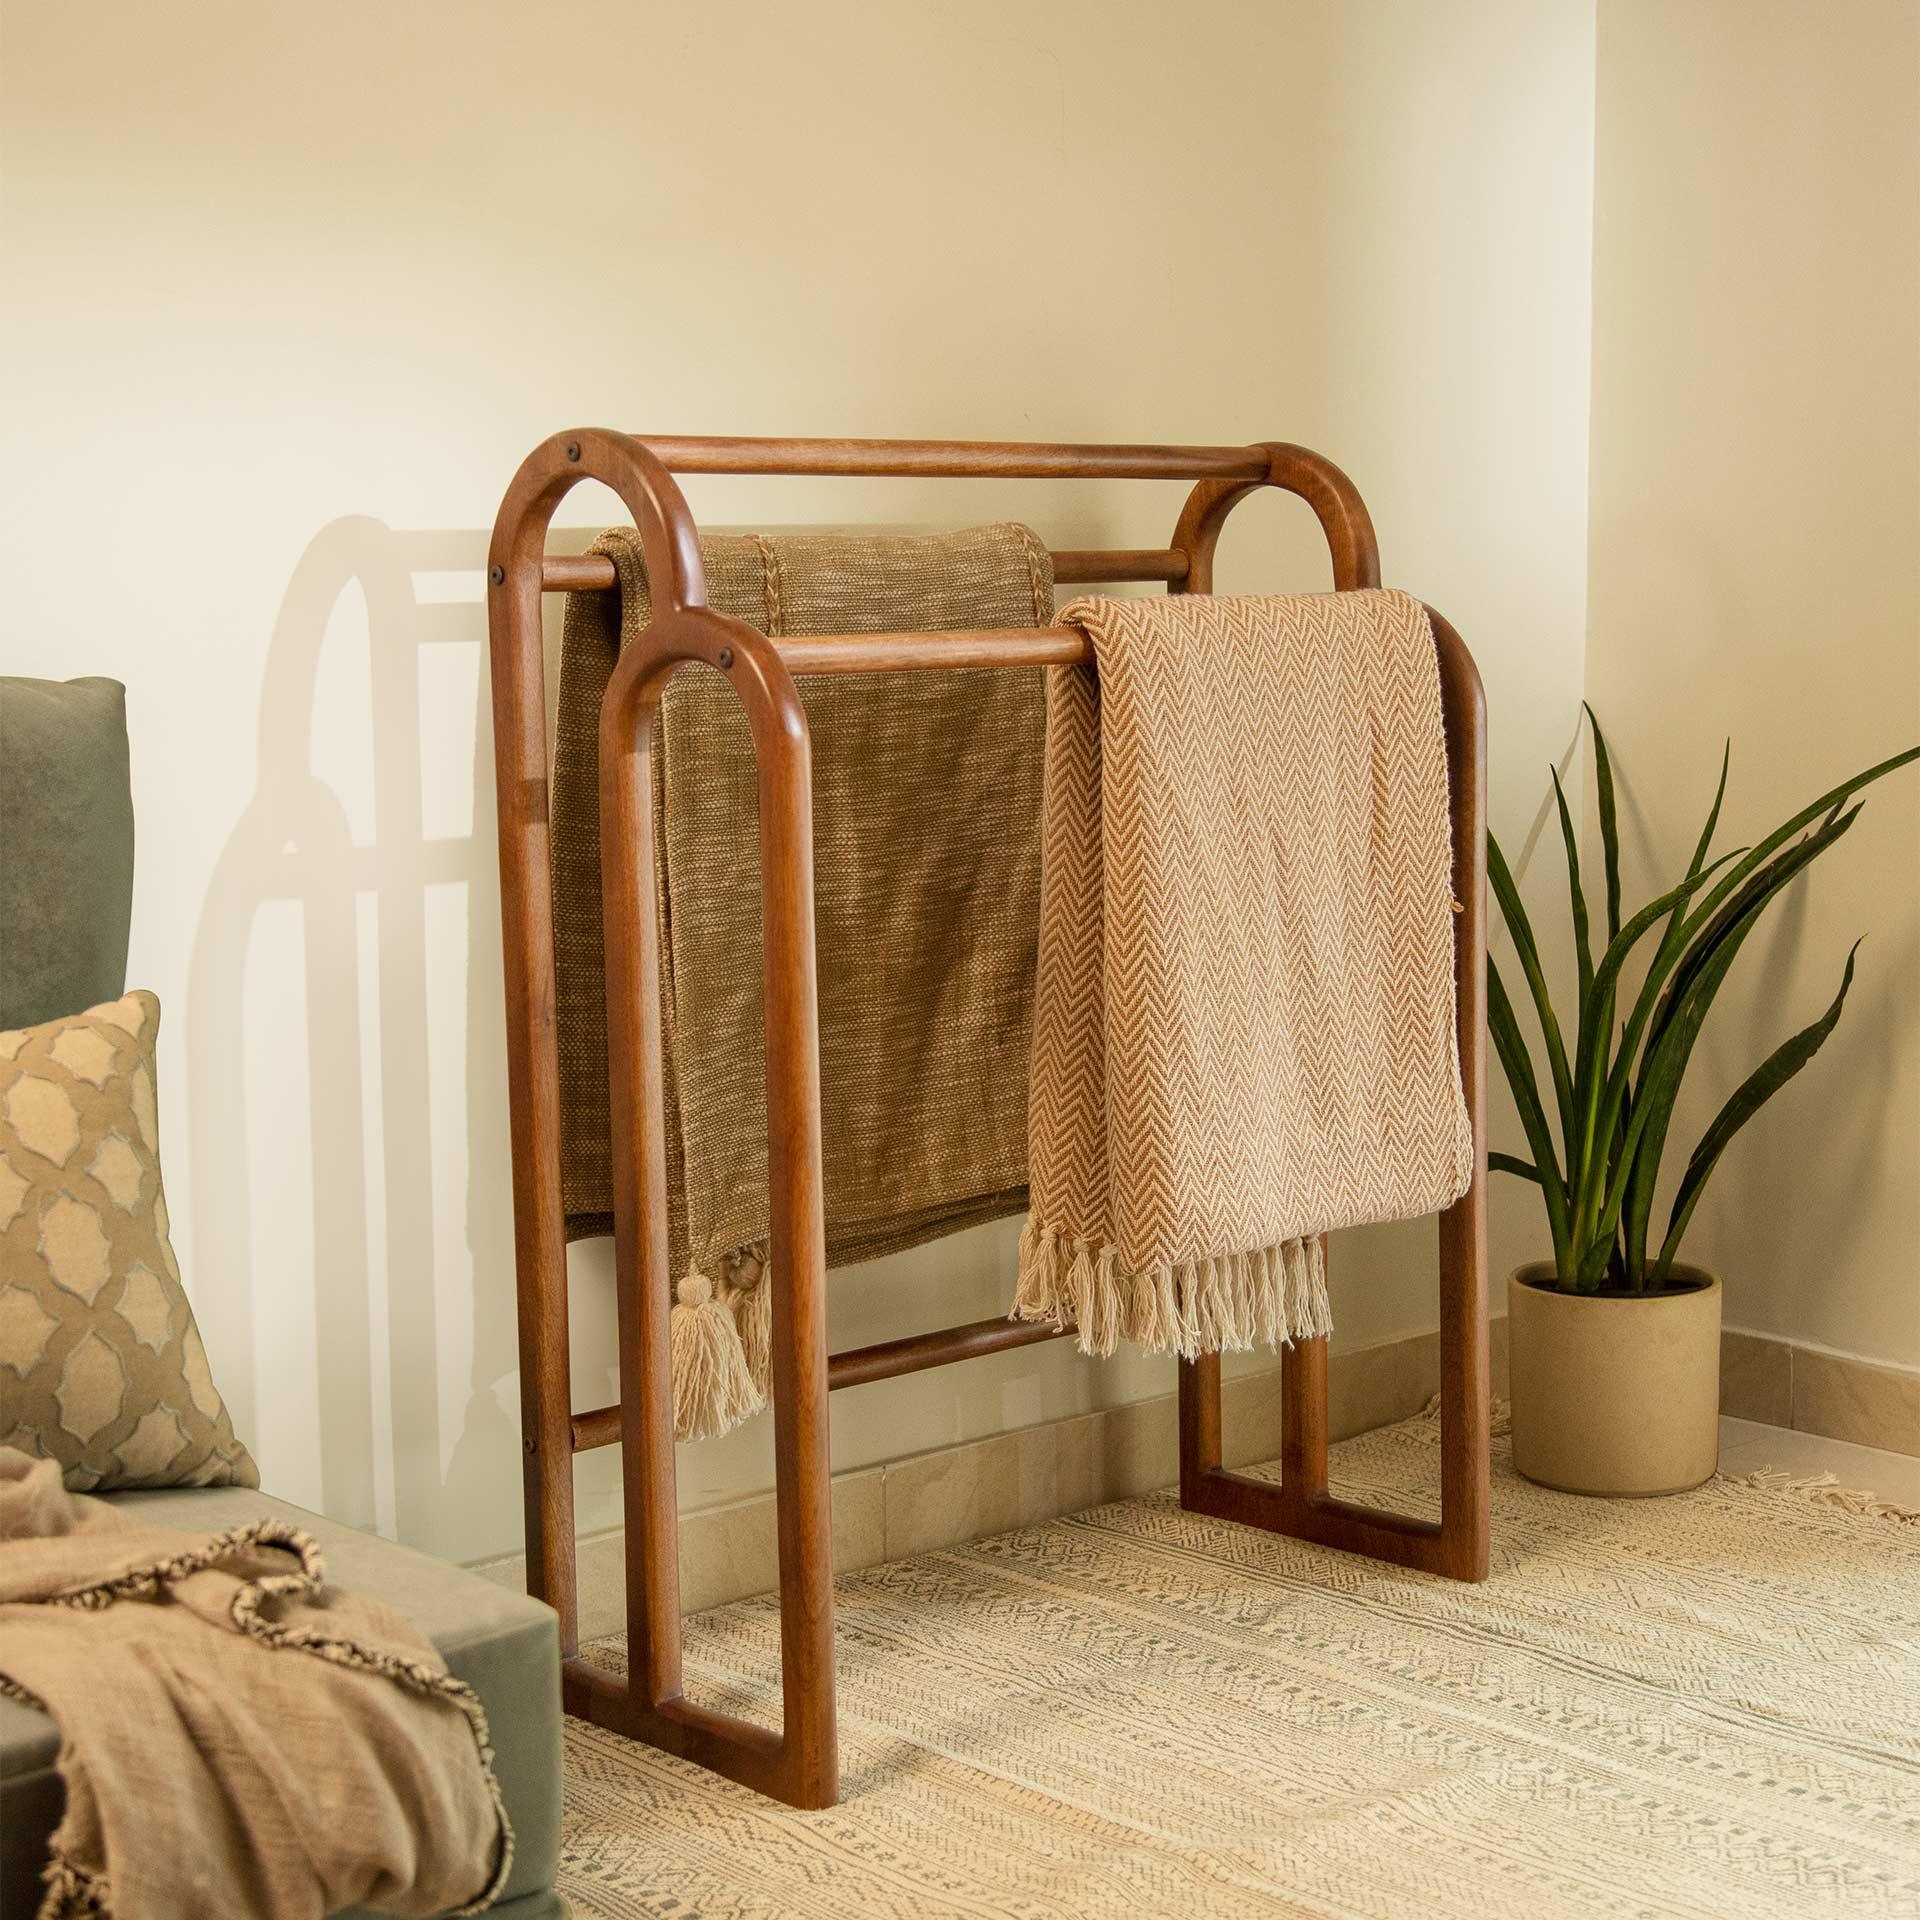 Old World ready-to-assemble towel holder